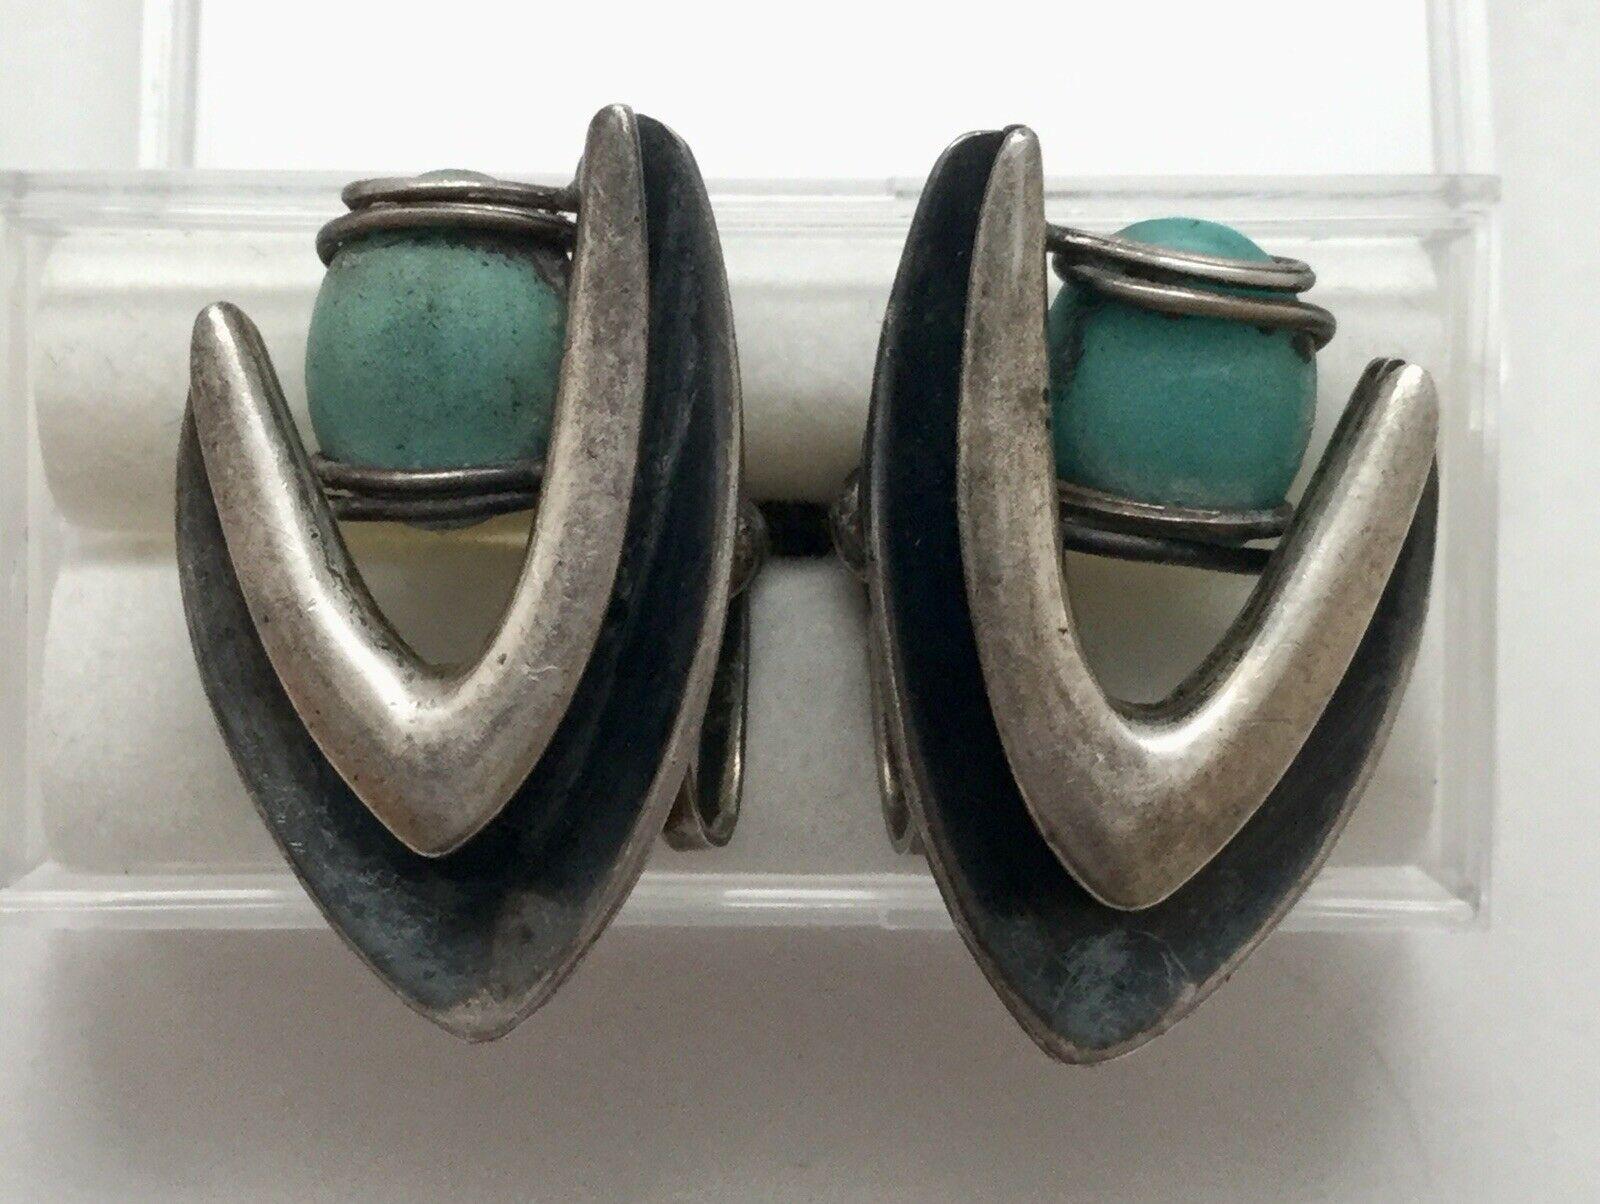 Taxco Mexico sterling silver turquoise boomerang screwback earrings by Jose Luis Flores.

Marked: JLF Taxco Eagle 3, TF-13 Sterling

Measures: 1 1/8